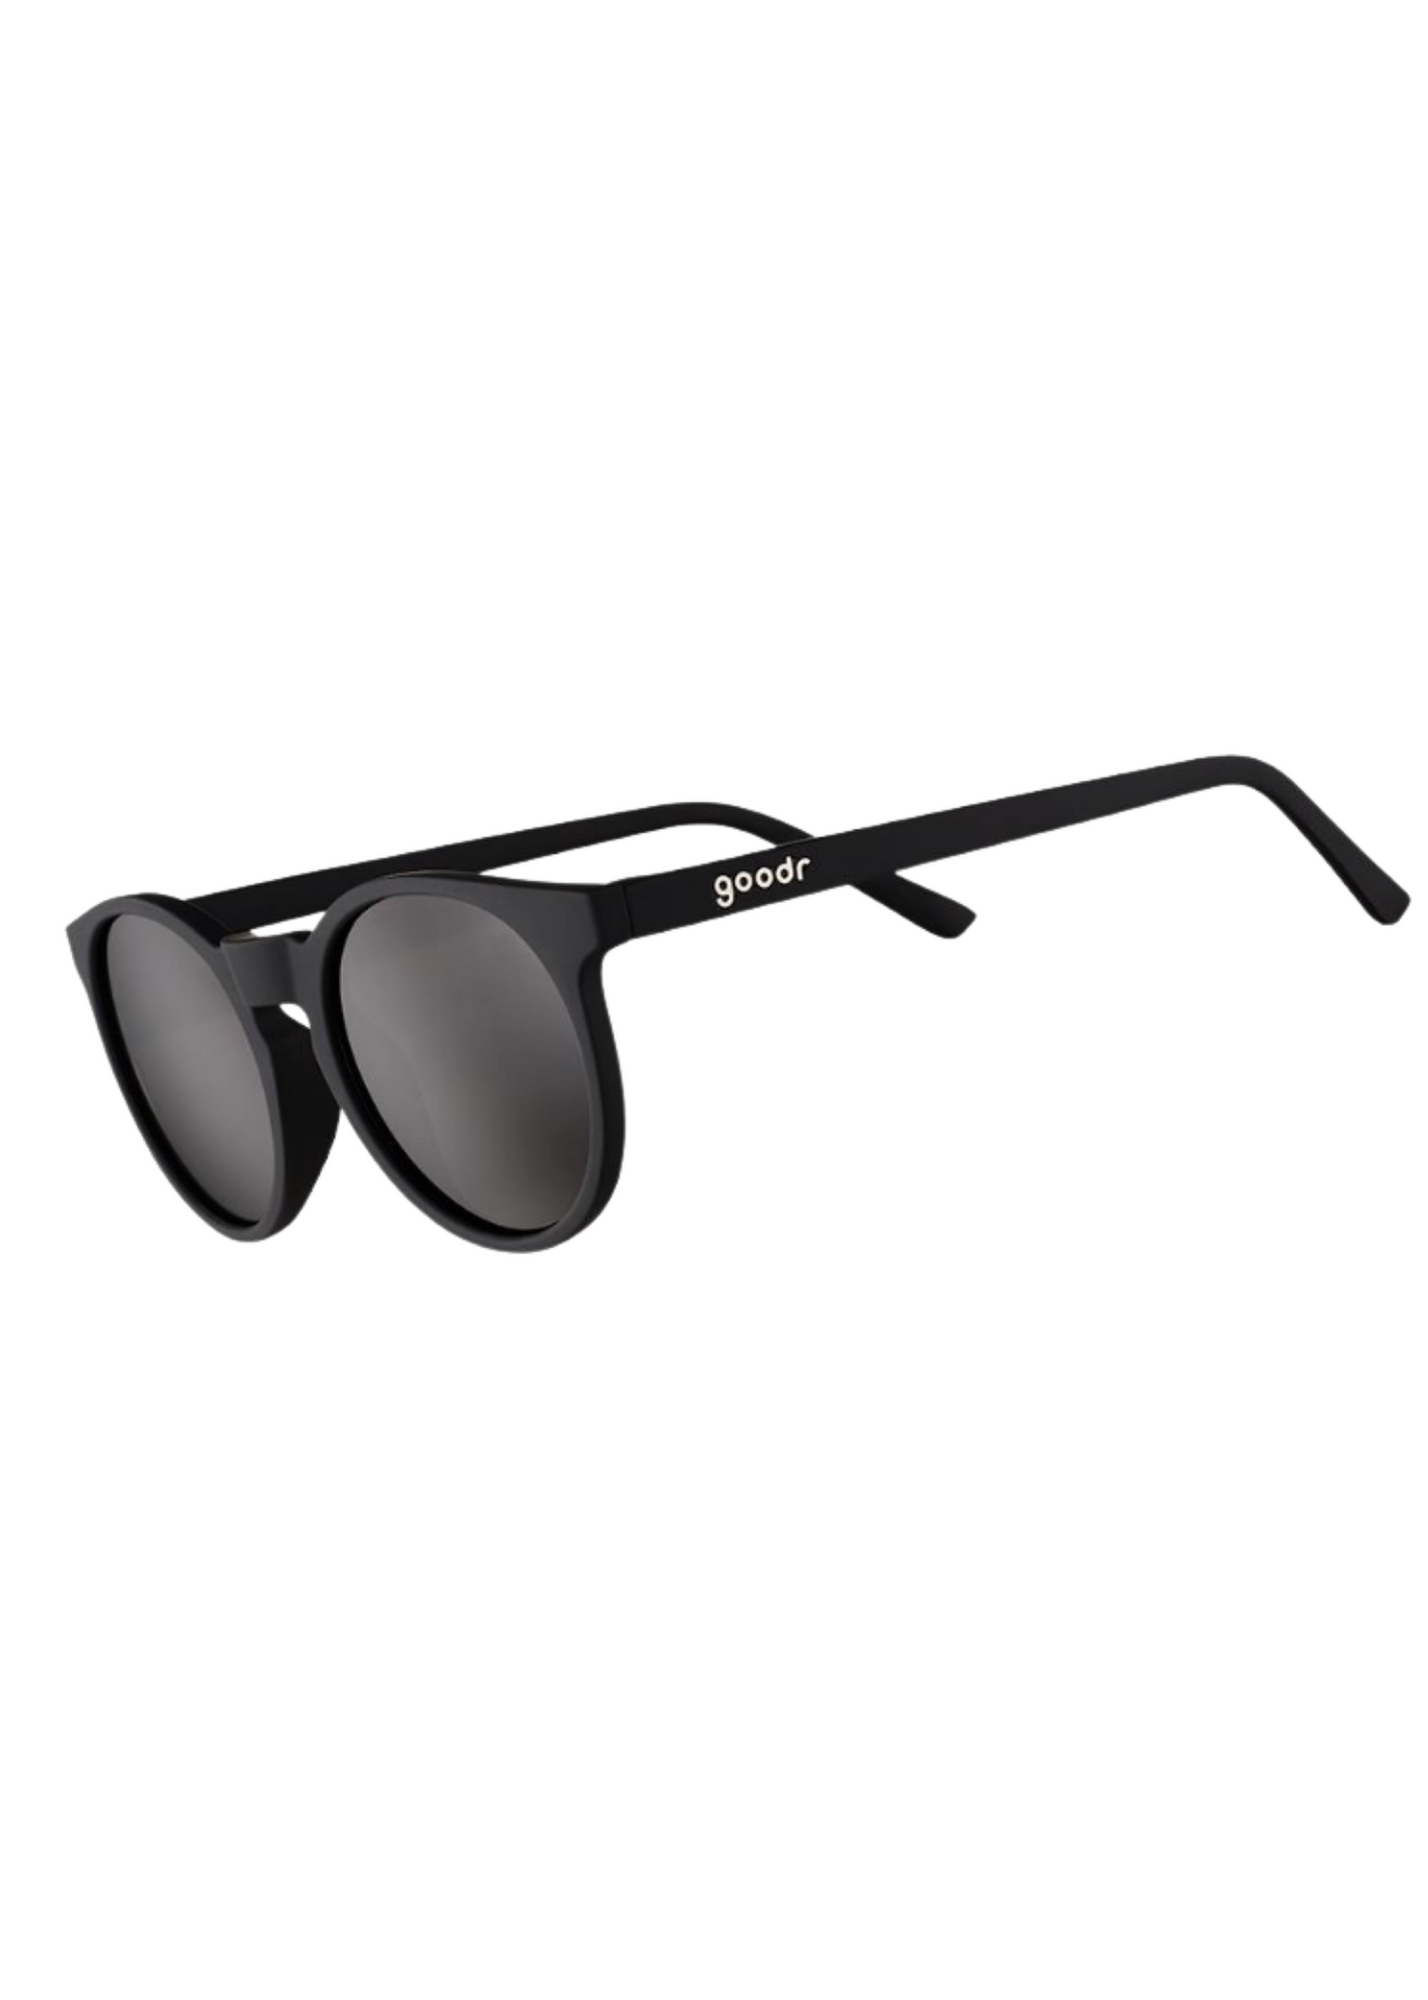 The Circle G Shades - Assorted